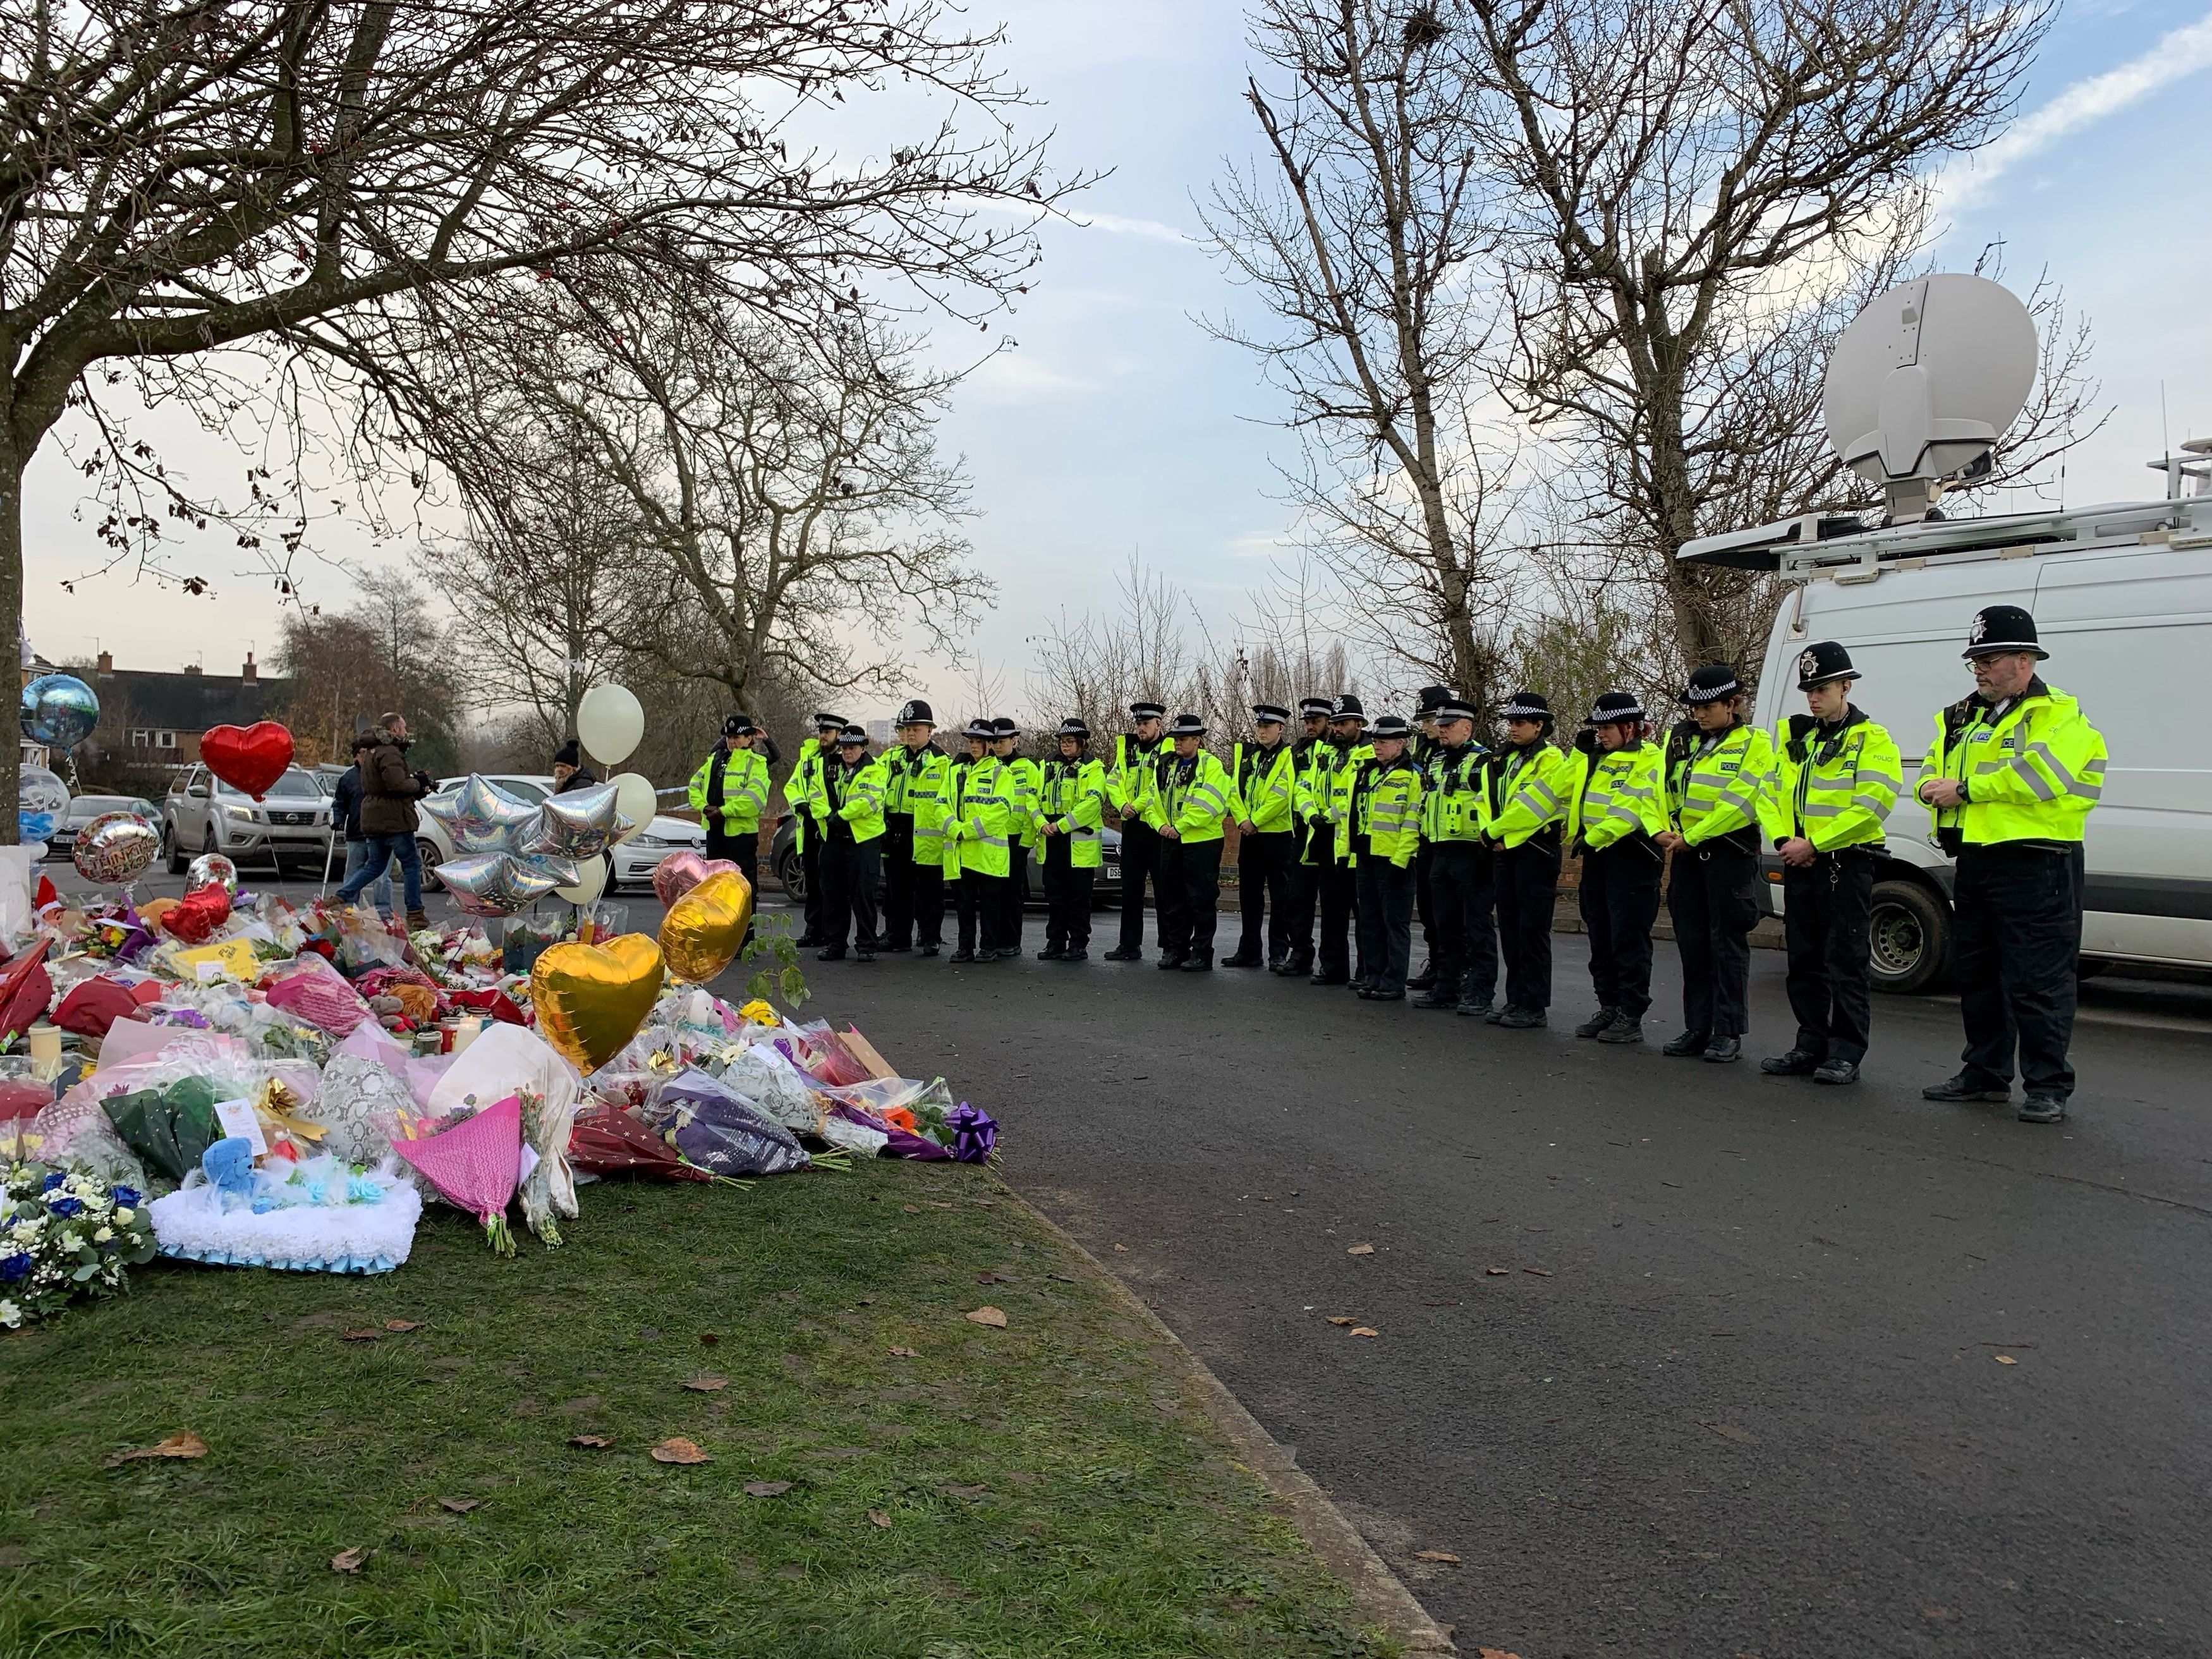 Officers from West Midlands Police lay flowers and stand in silence near the scene in Babbs Mill Park